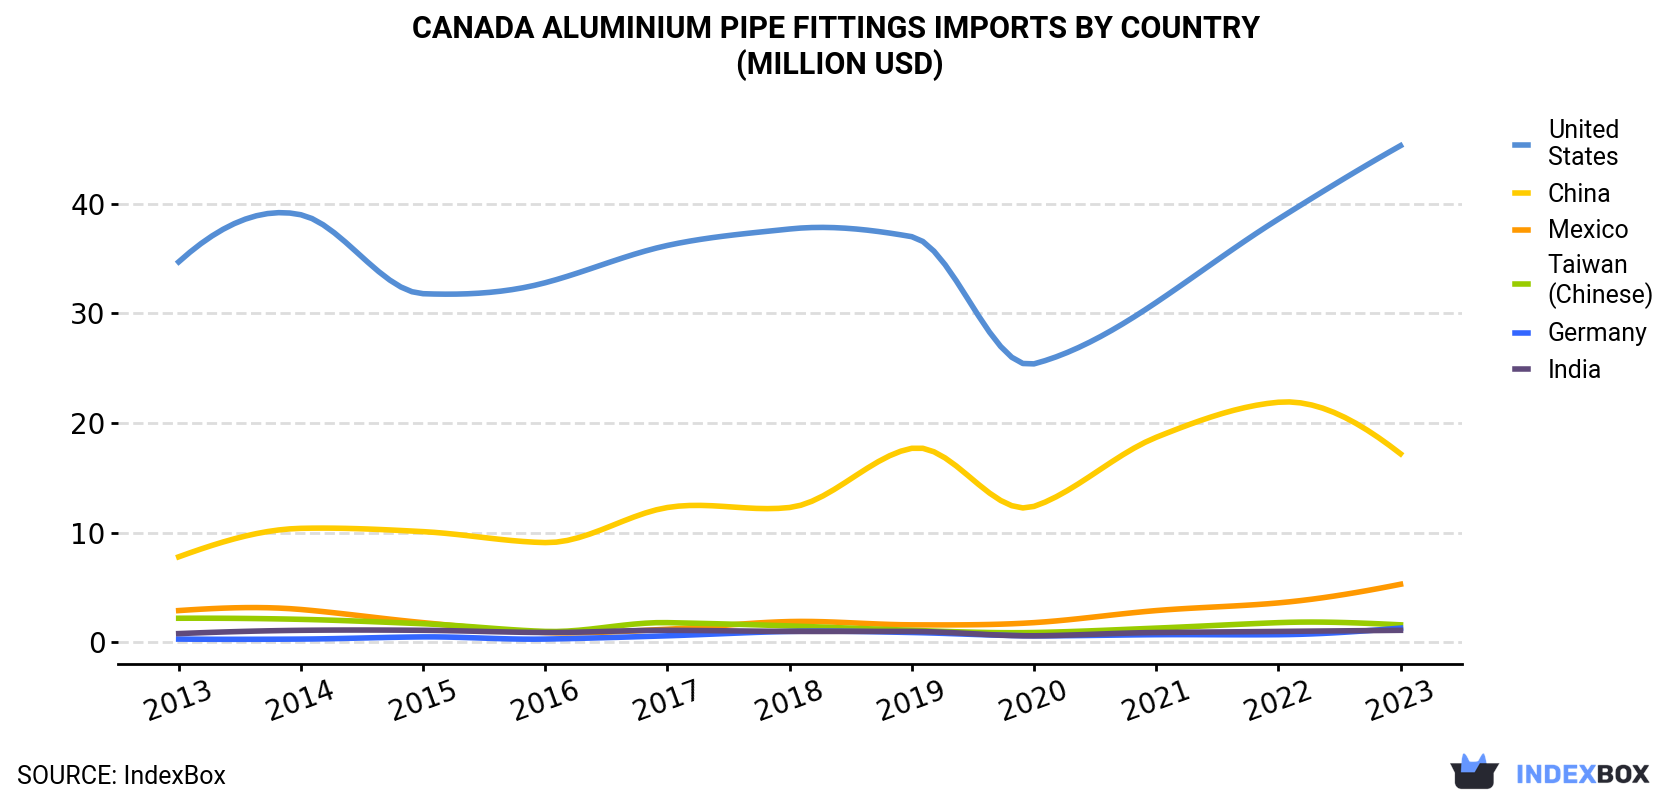 Canada Aluminium Pipe Fittings Imports By Country (Million USD)